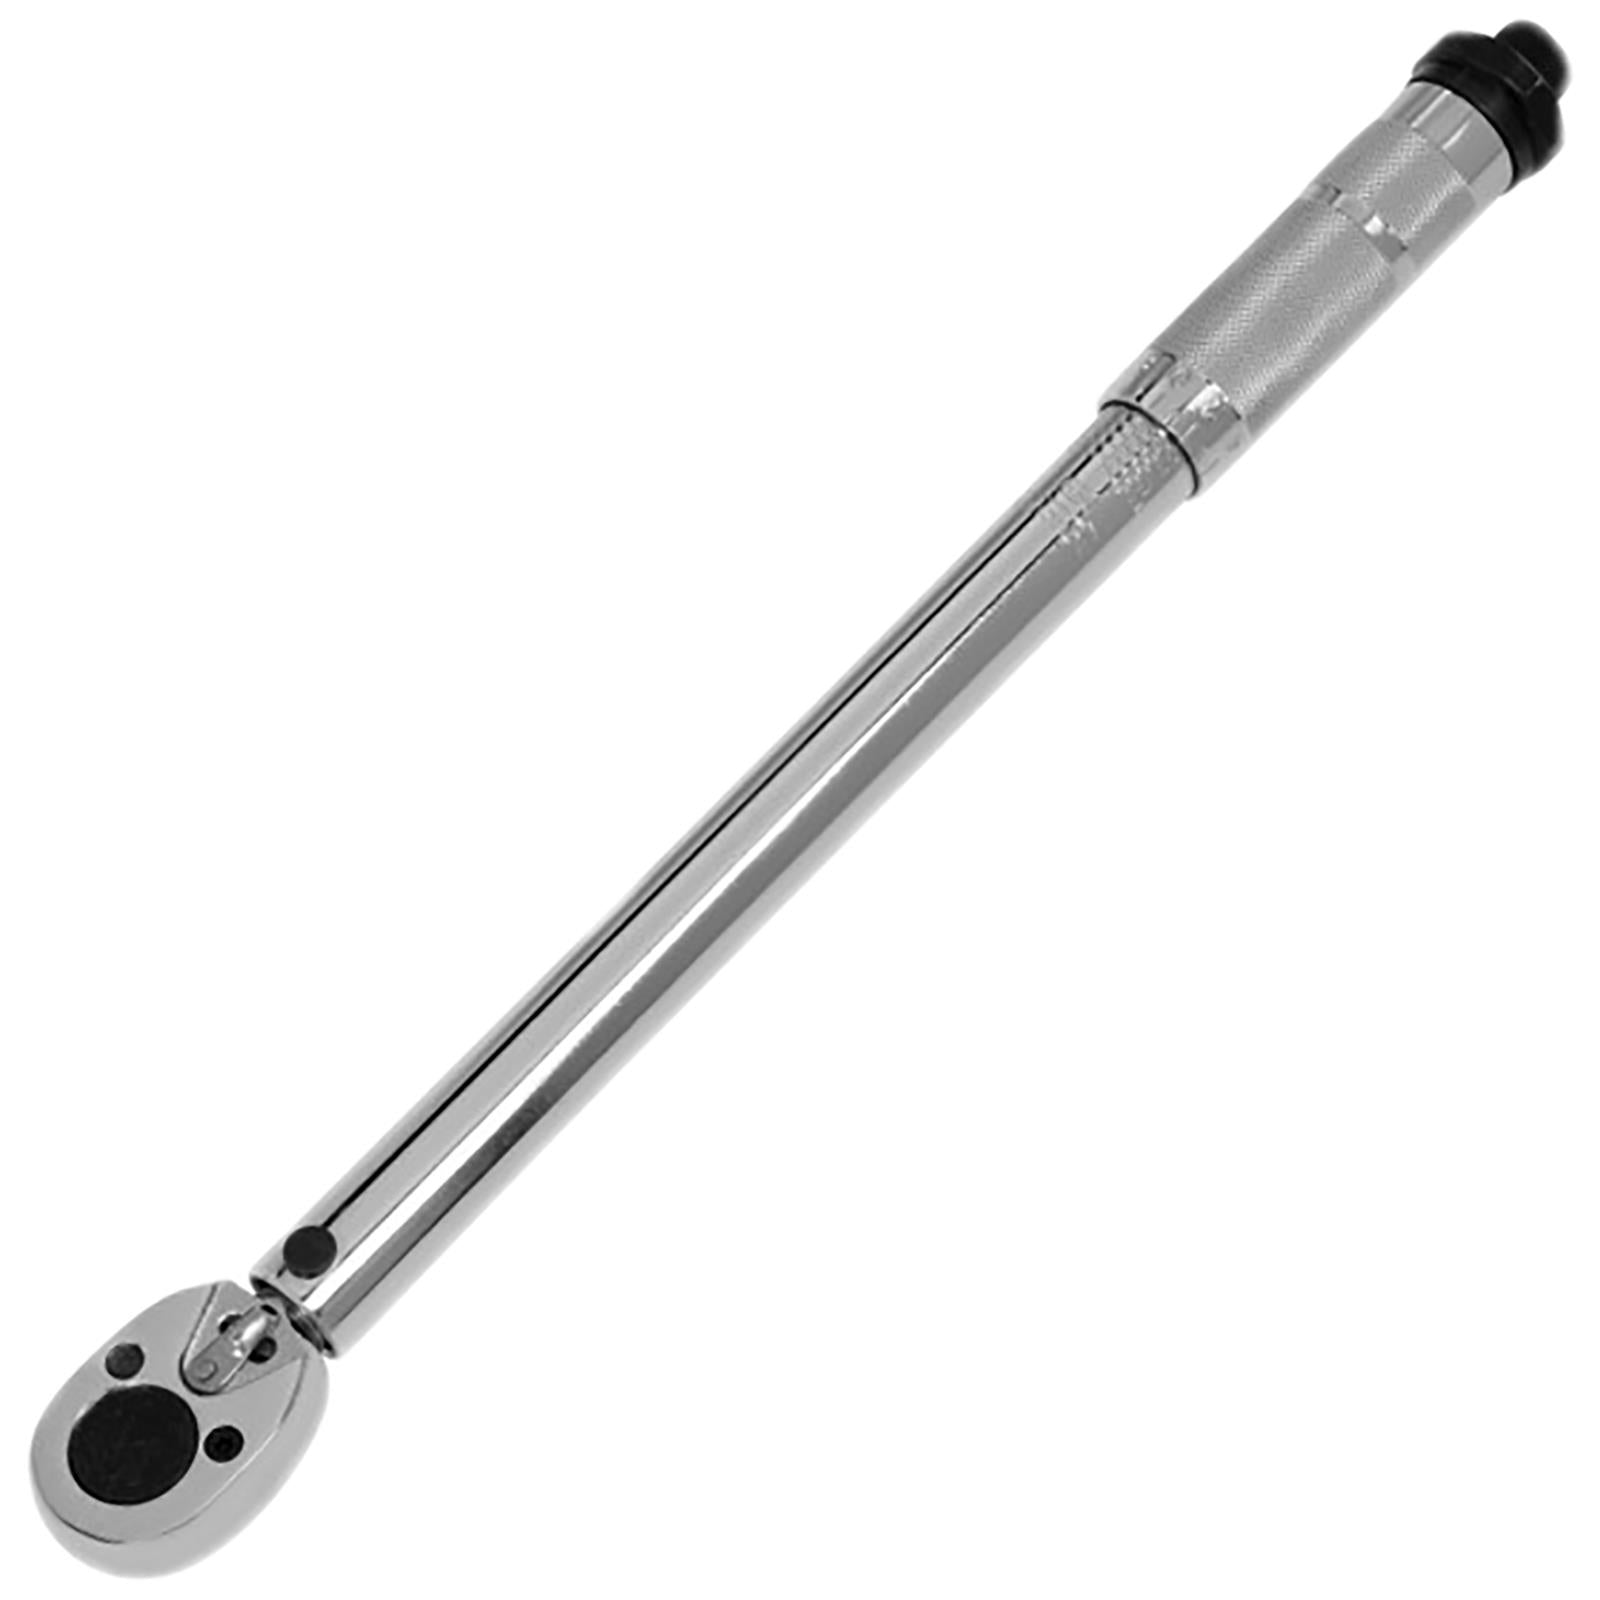 BlueSpot Calibrated Torque Wrench 1/2" Drive 42-210Nm